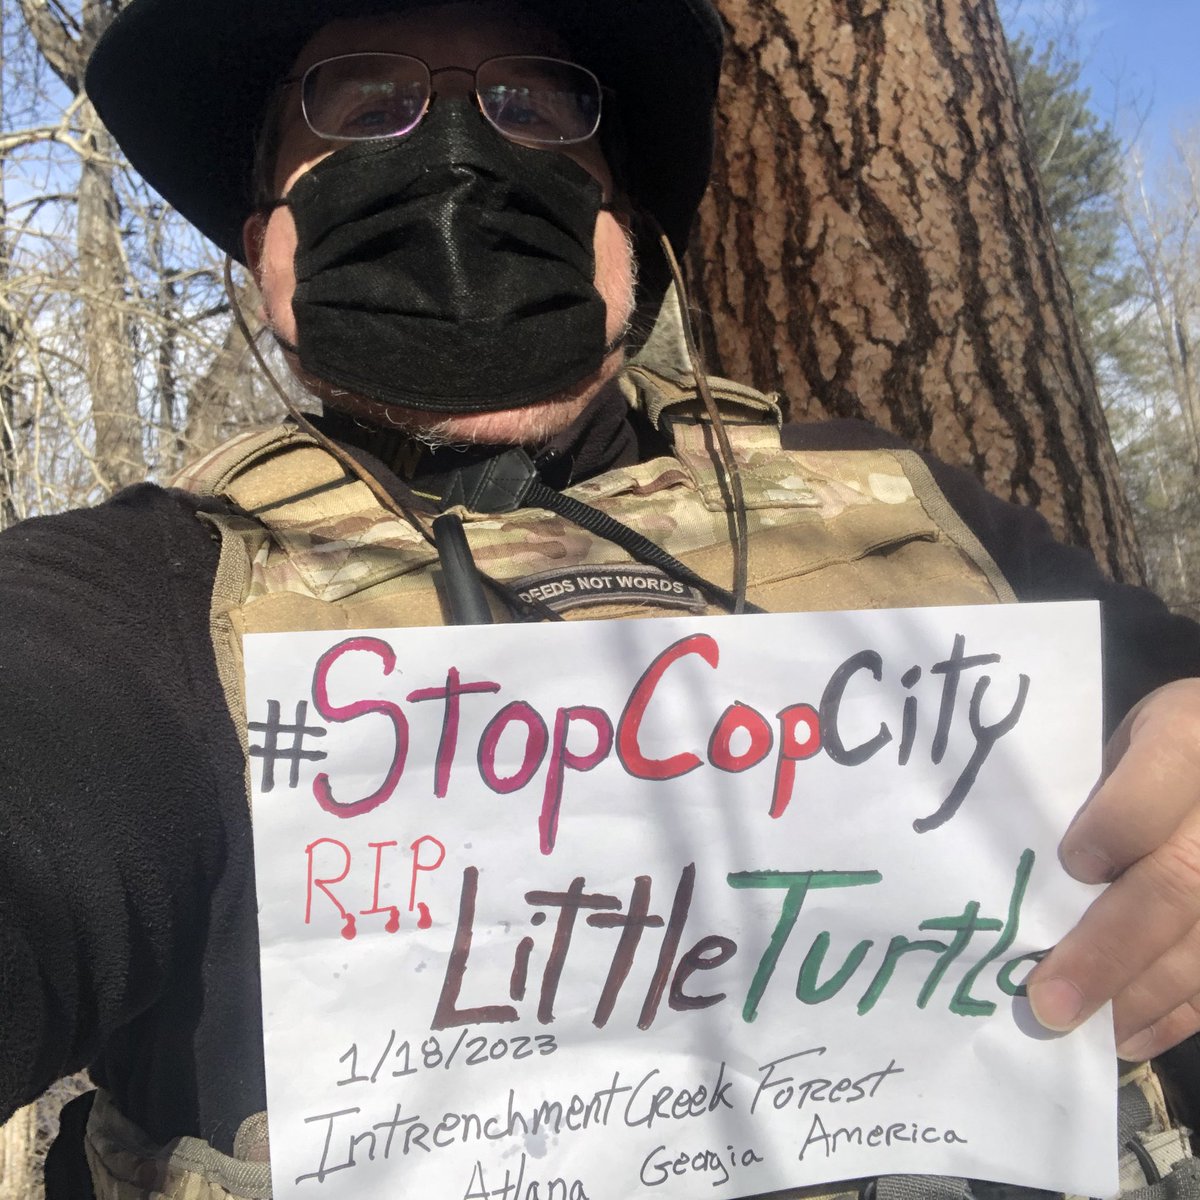 Solidarity from
 Montana Deforestation Patrol 
#StopCopCity 
#ForestDefenders #ClimateAction #FridaysForFuture #ClimateStrikeOnline 
From Inside a Protected Park, once almost Bulldozed into McManisons. But #EcoWarrior took Action & locals wanted Last #forest as #park so...!